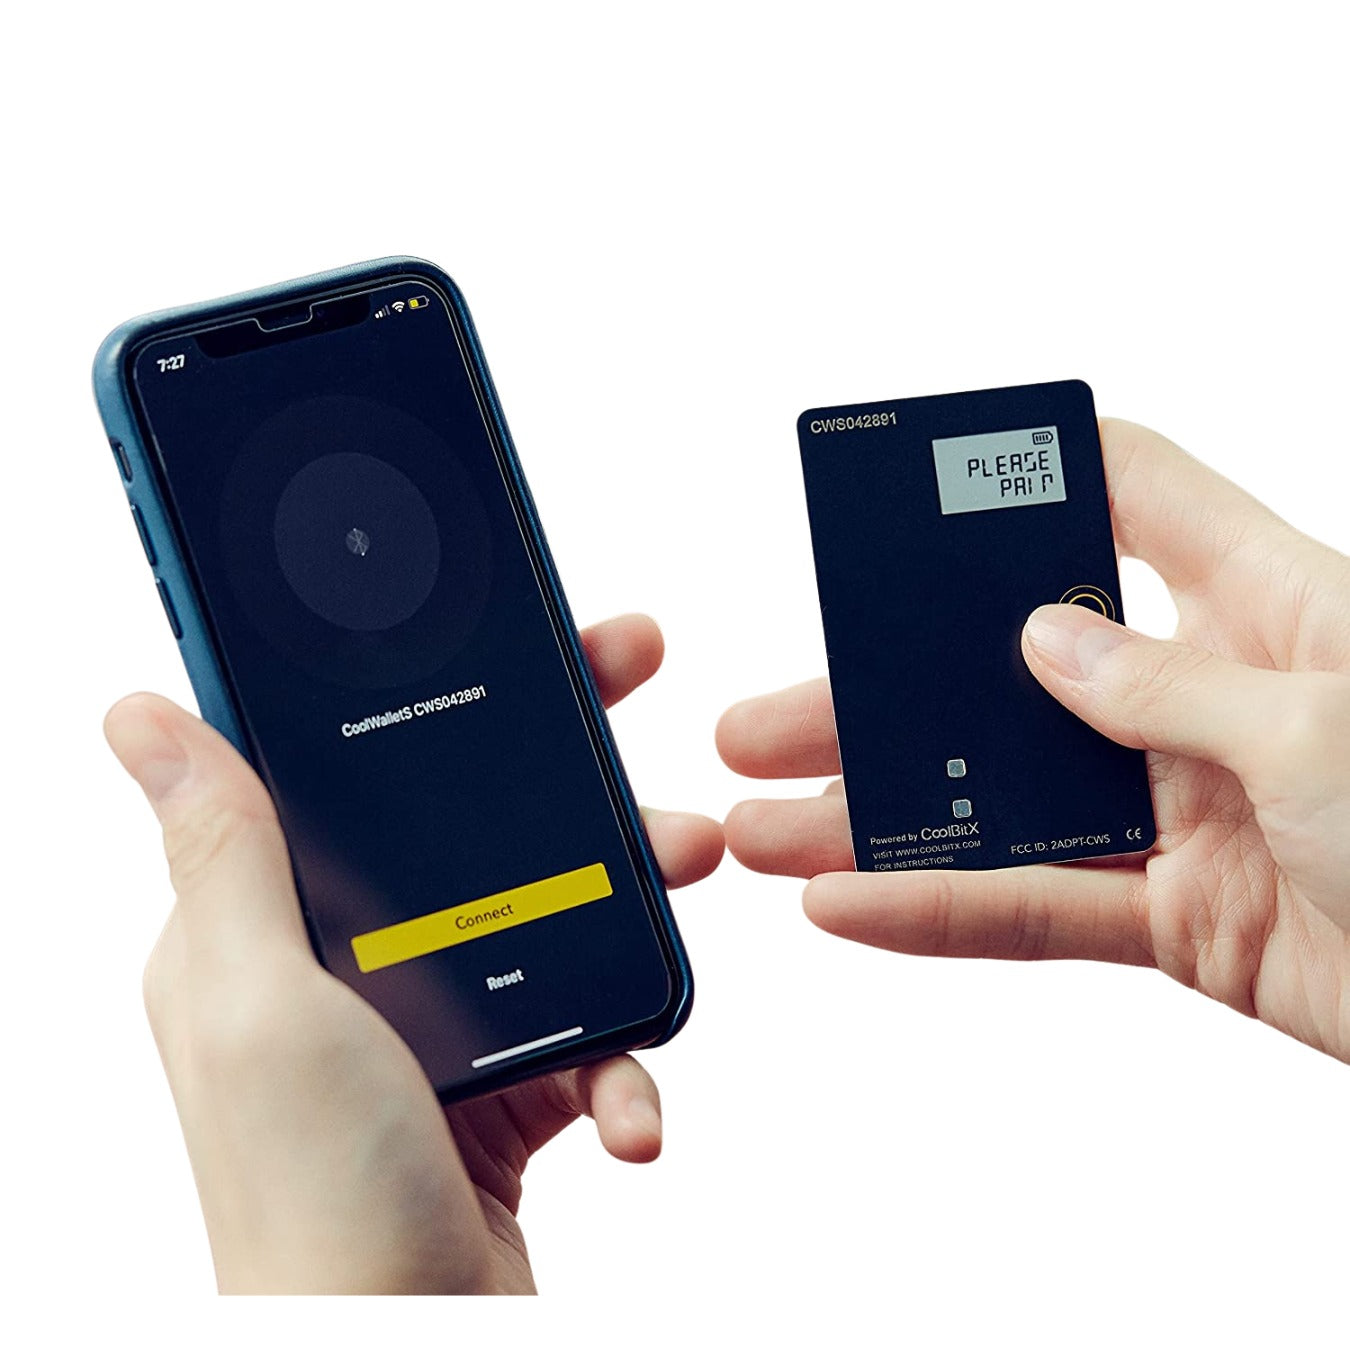 A person's hands: the right holding a CoolWallet S hardware wallet, and the left displaying a crypto wallet on an iPhone.